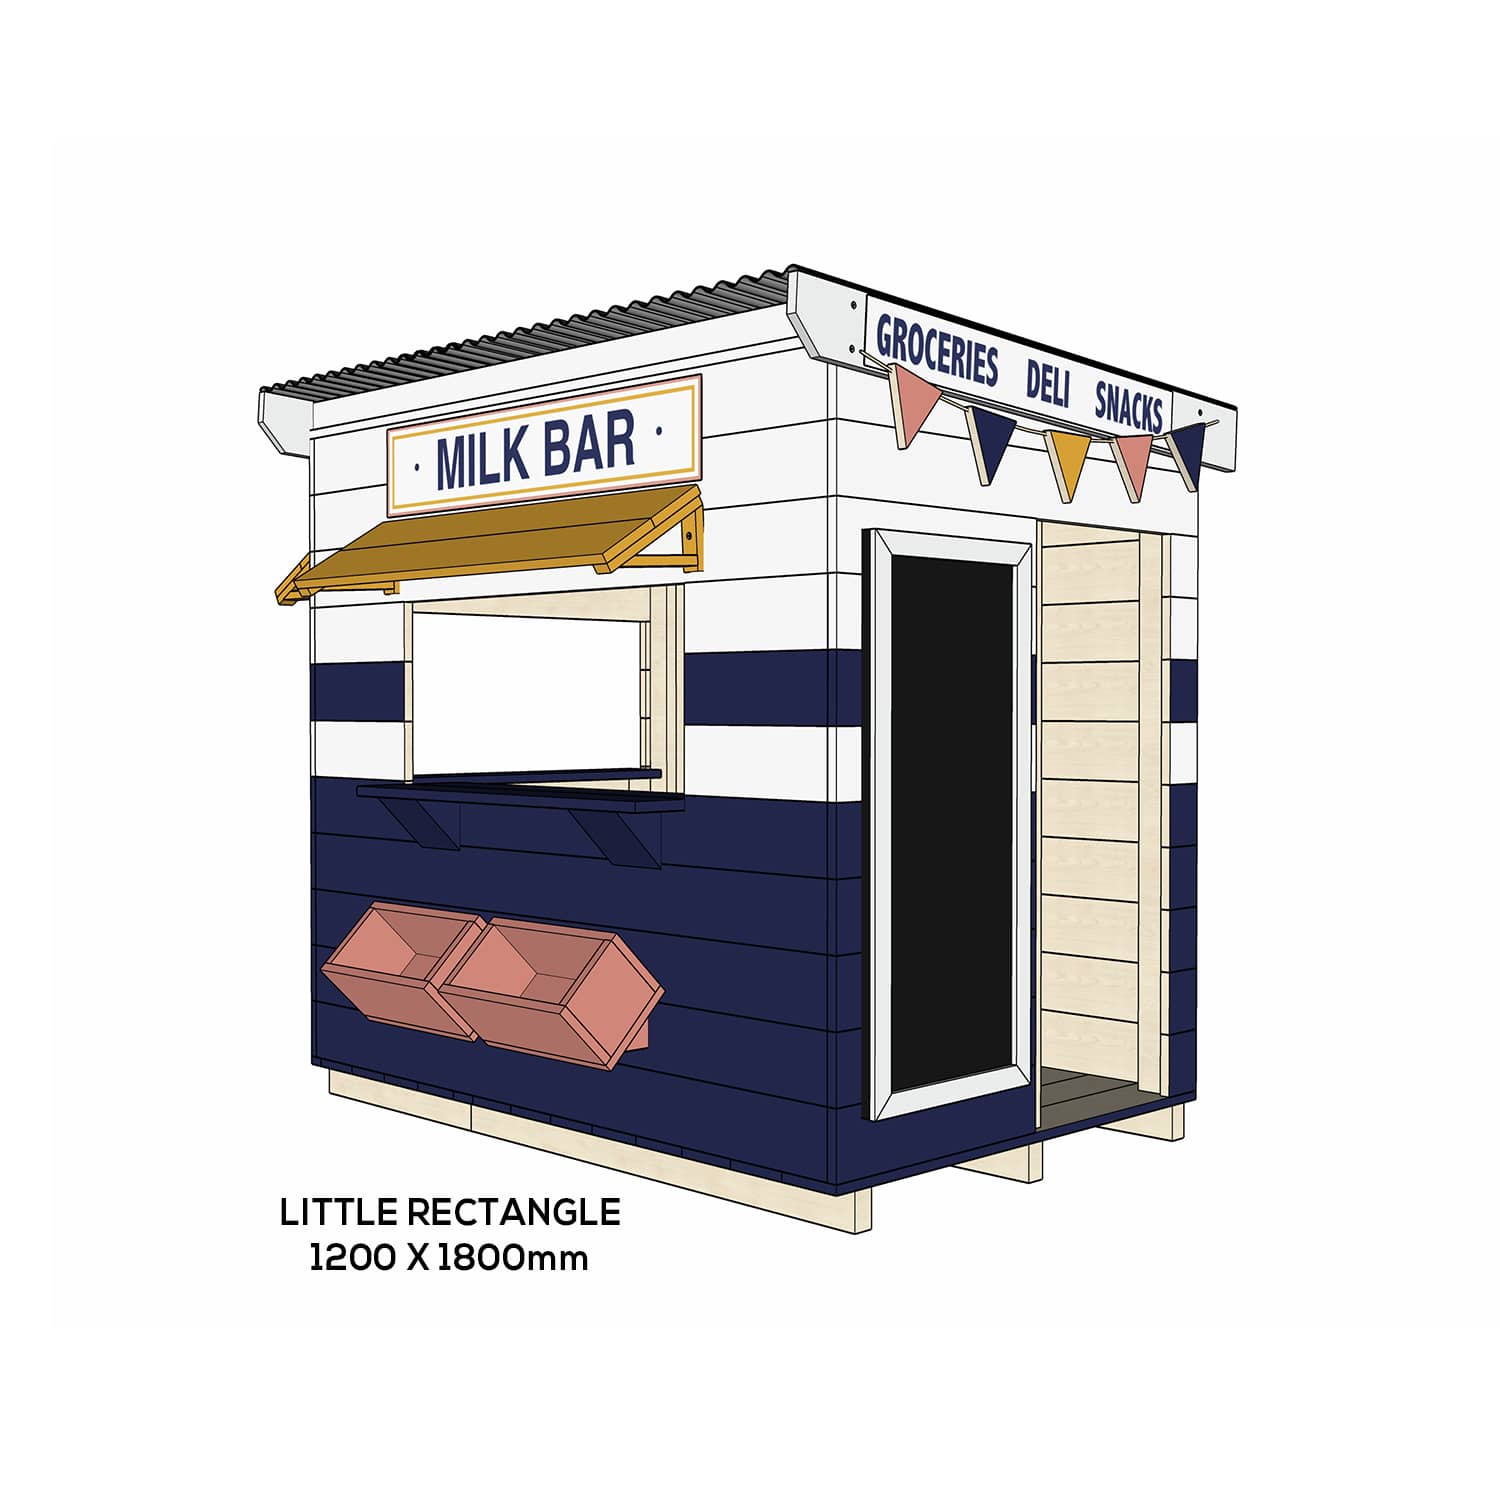 Painted wooden milk bar themed cubby little rectangle size